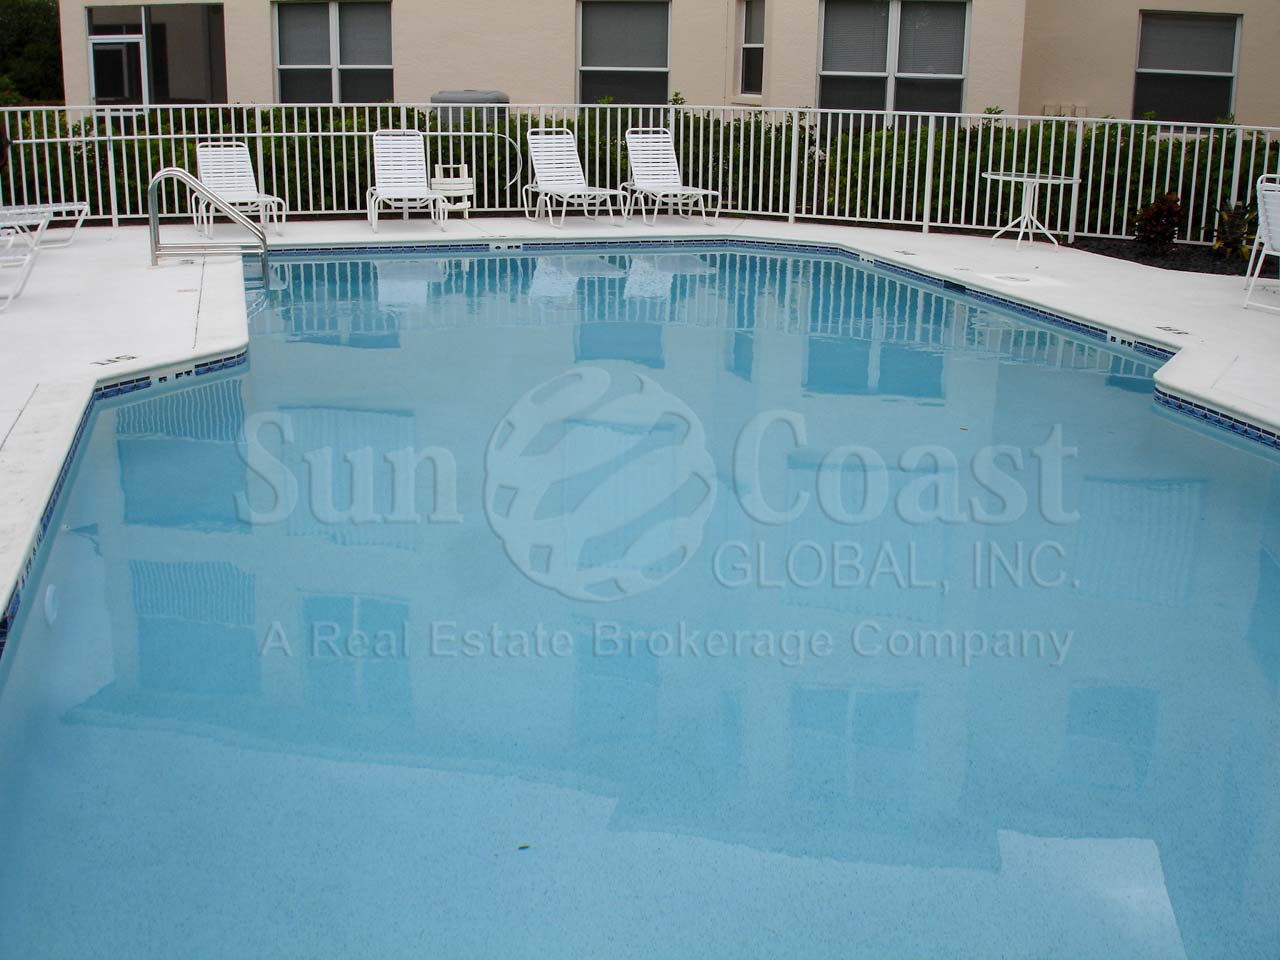 Compass Point South at Windstar 1 of 2 community pools